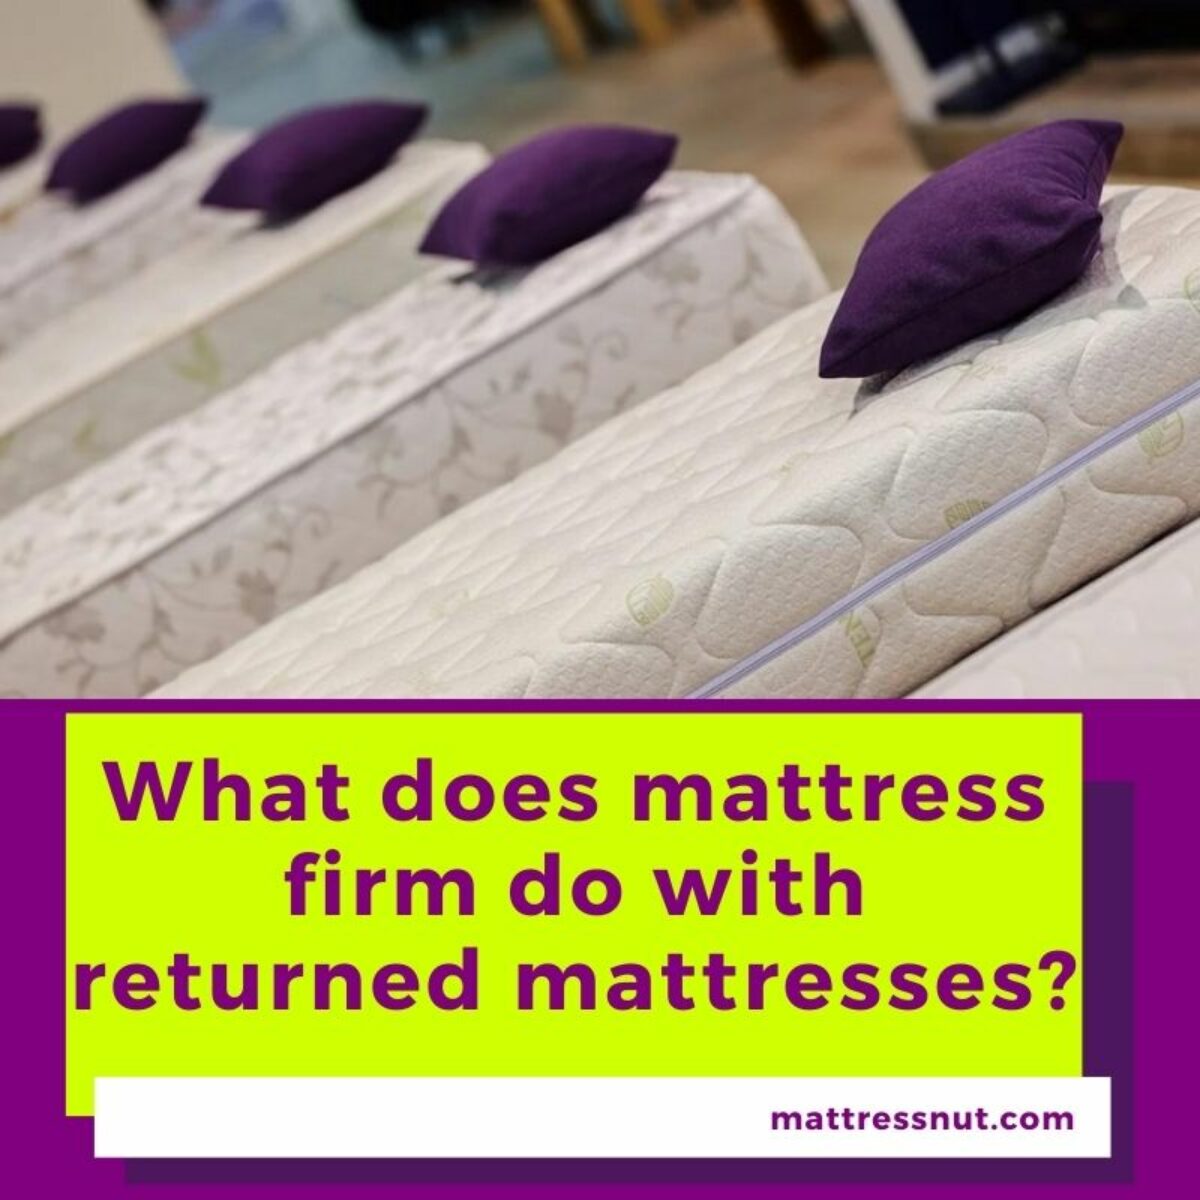 What Does Purple Do With Returned Mattresses?